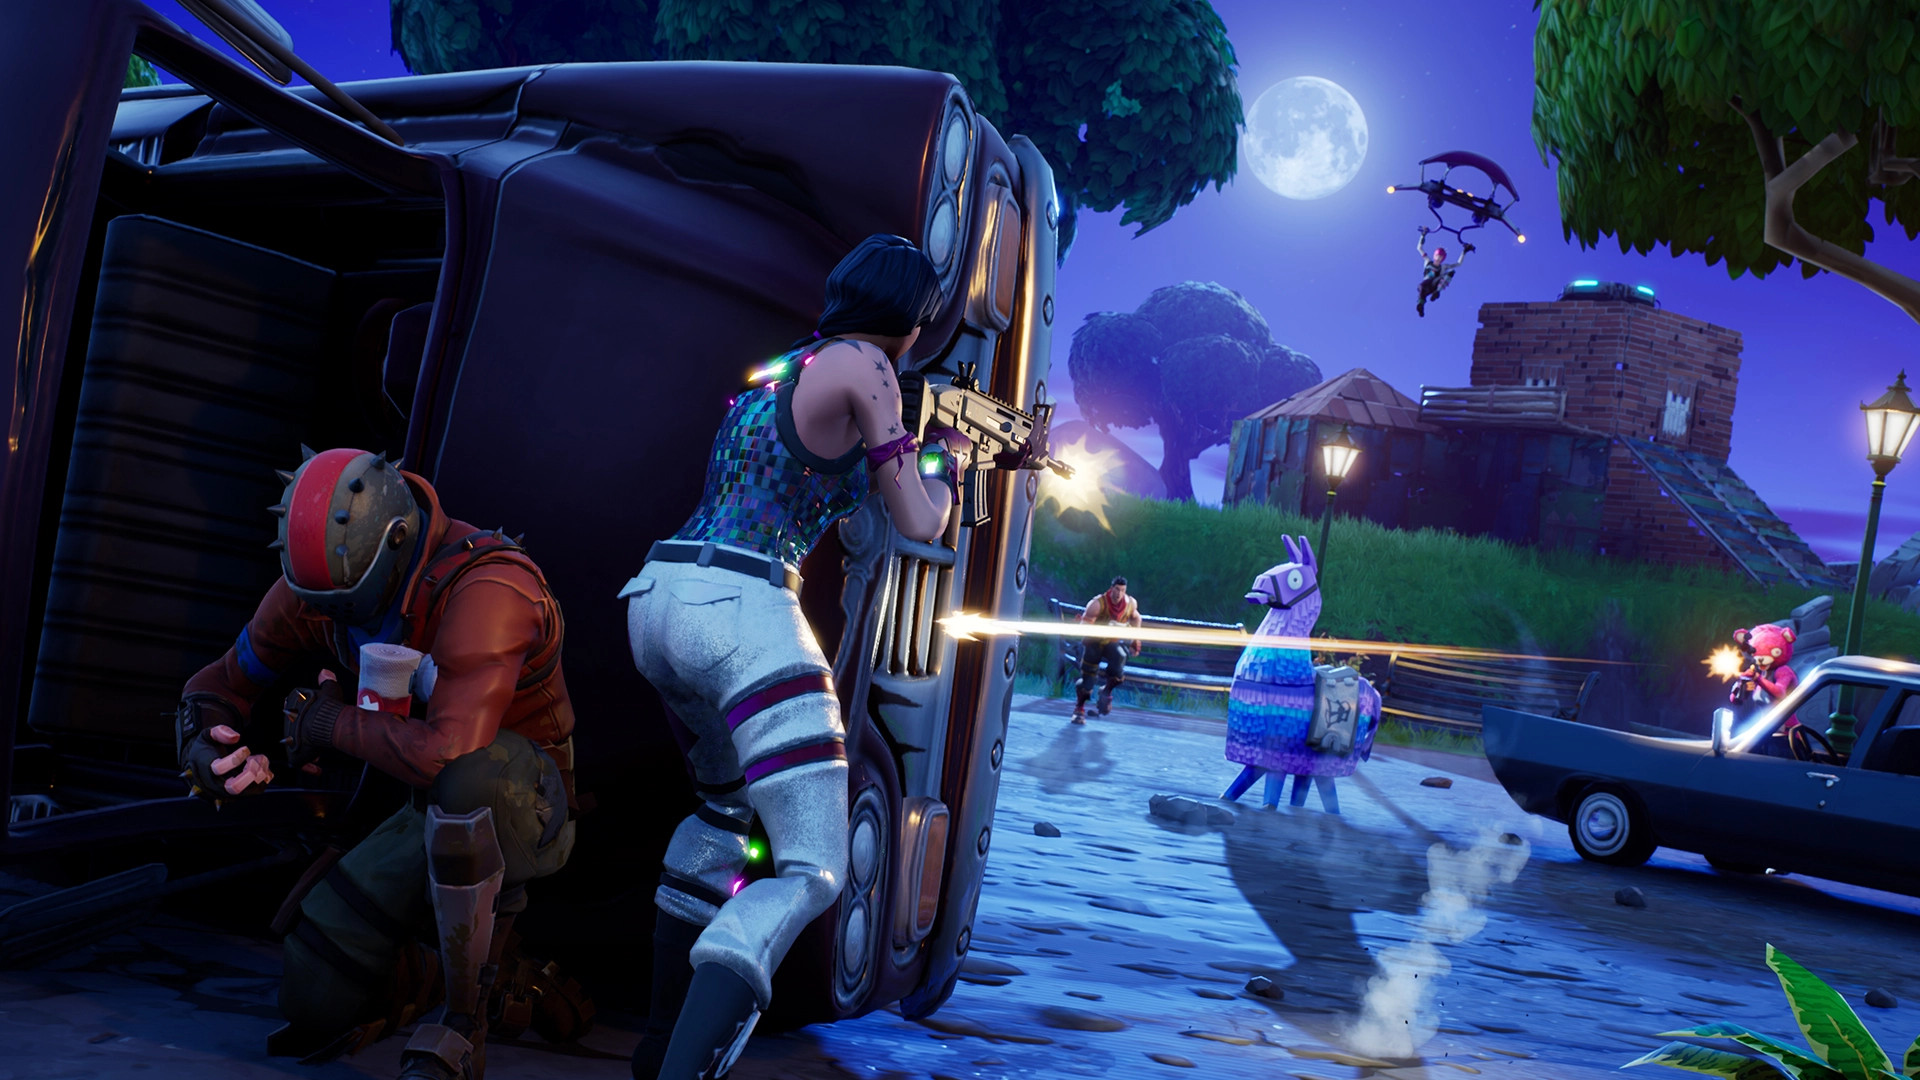 Free shooting games: Fortnite. Players fight it out in the darkness of night.